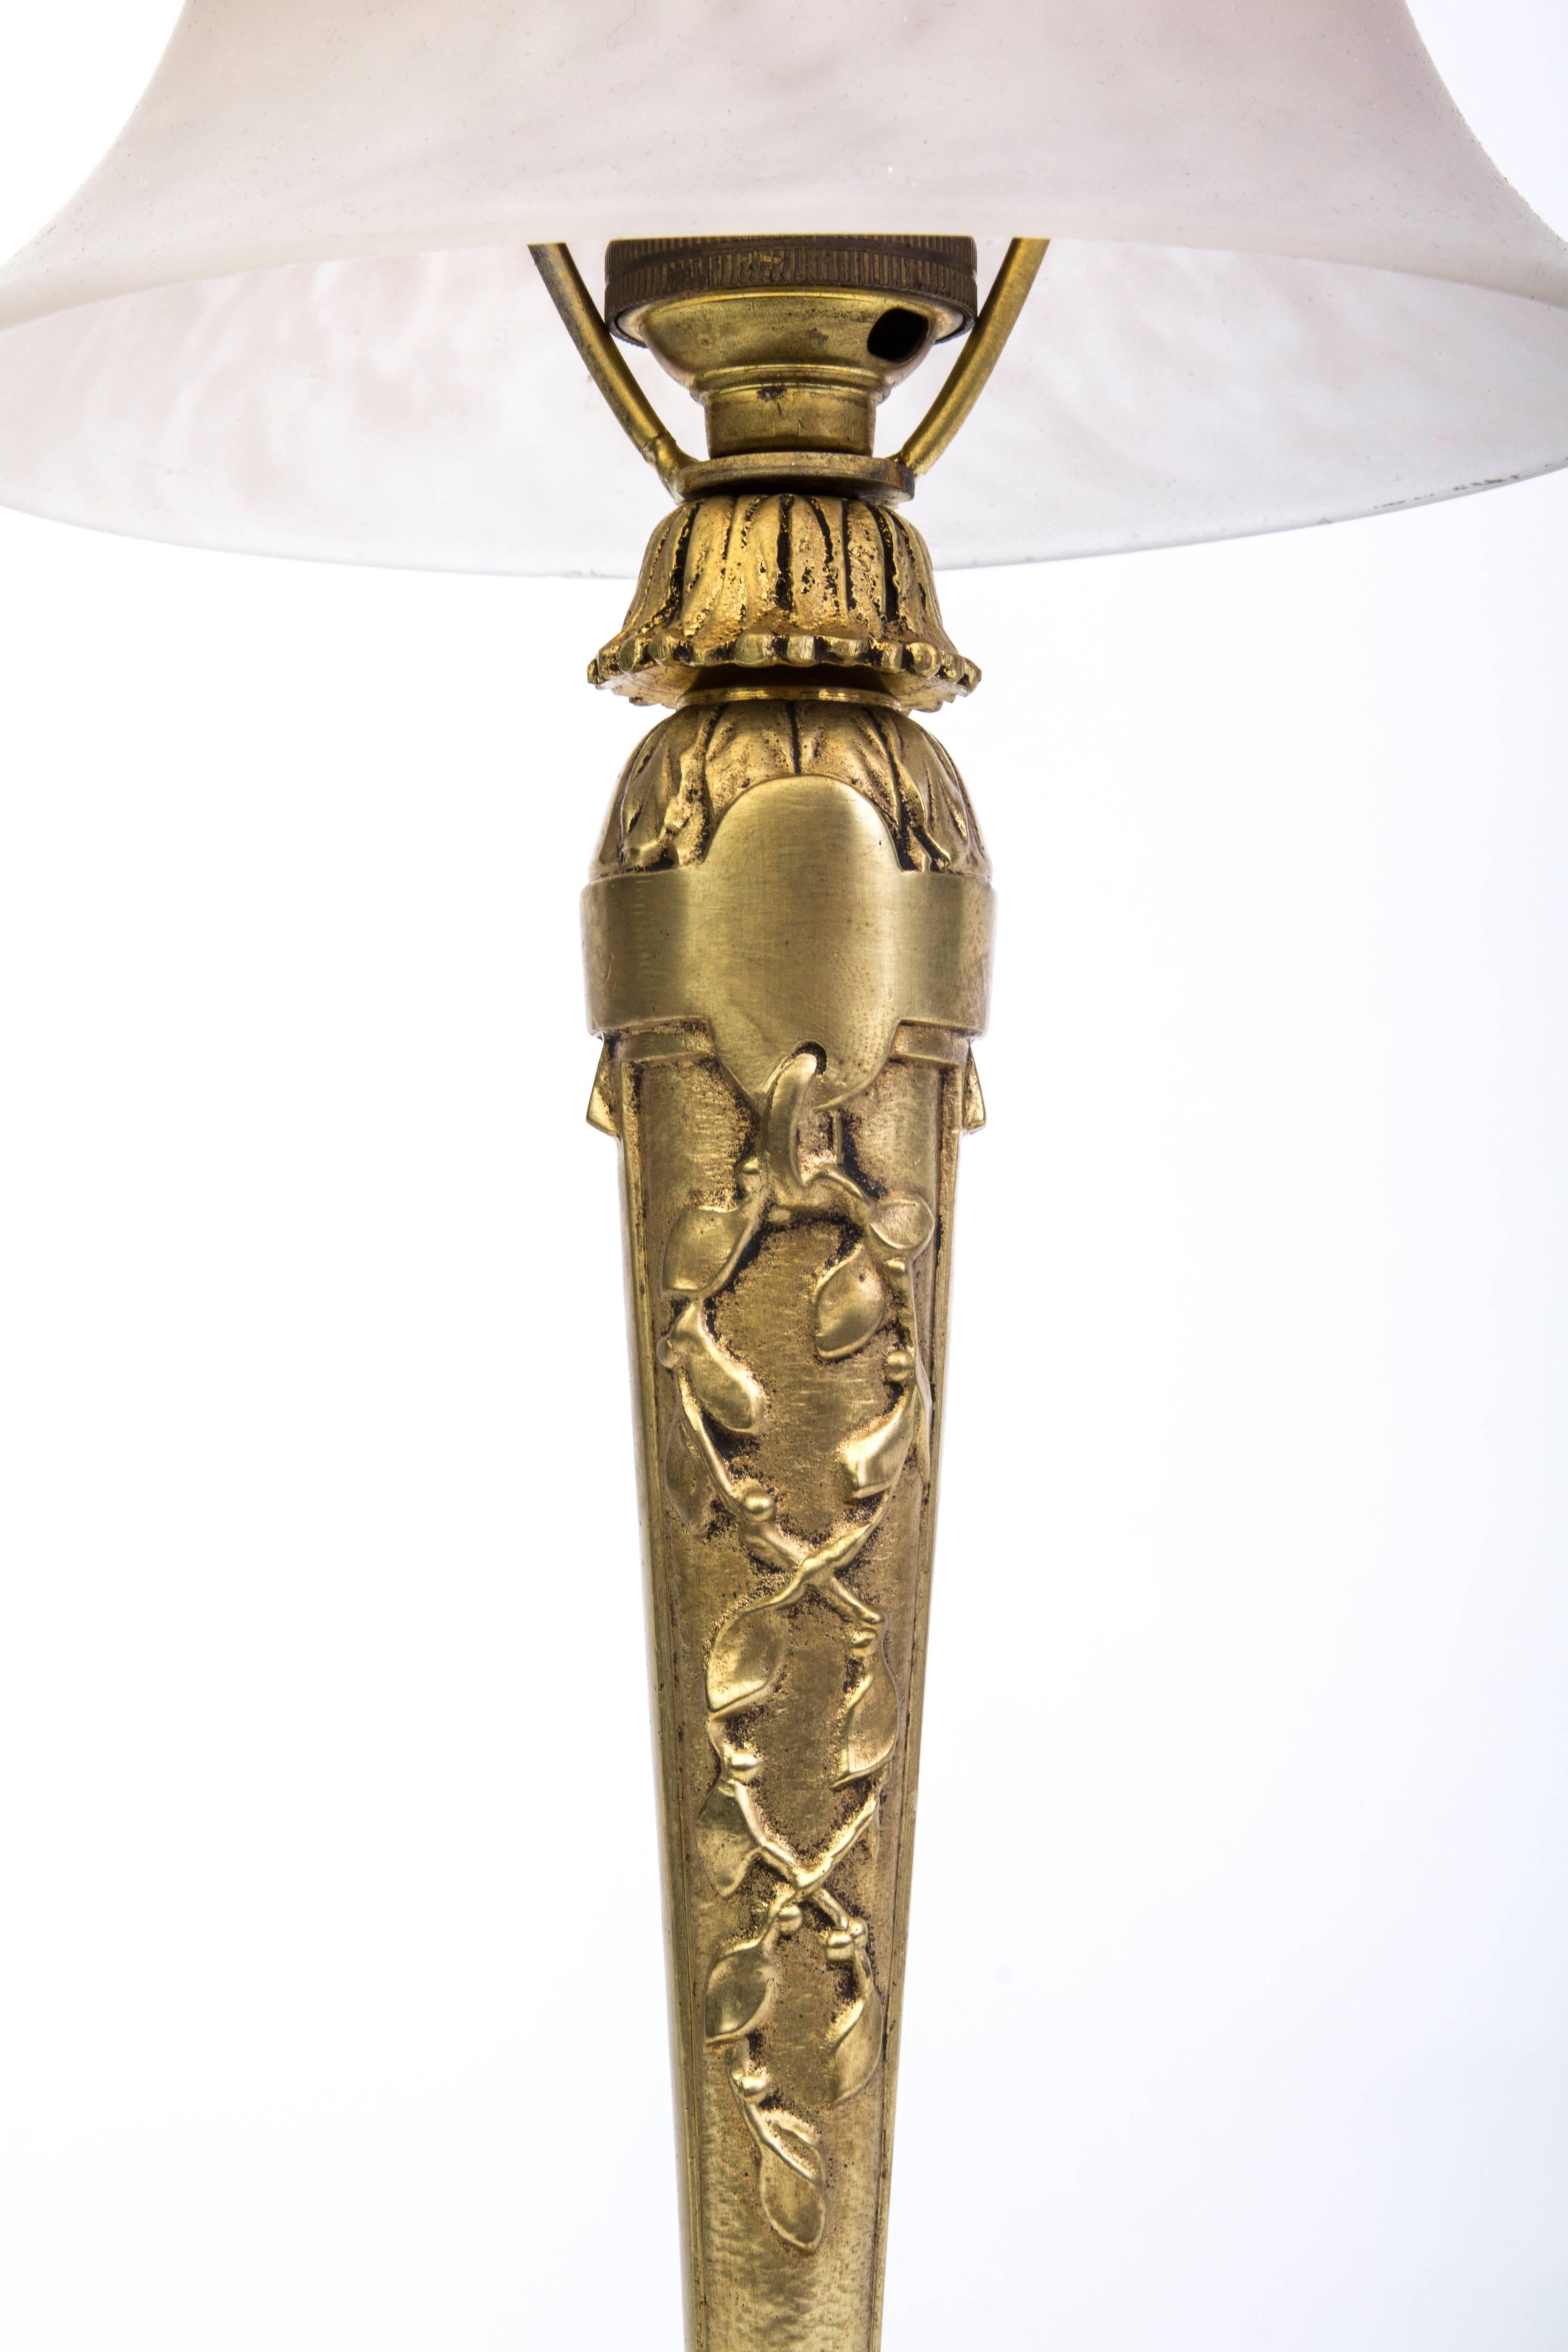 Wonderful 1920s French Art Deco Bronze Table Lamp Signed by Charles Schneider In Good Condition For Sale In Kingston, NY